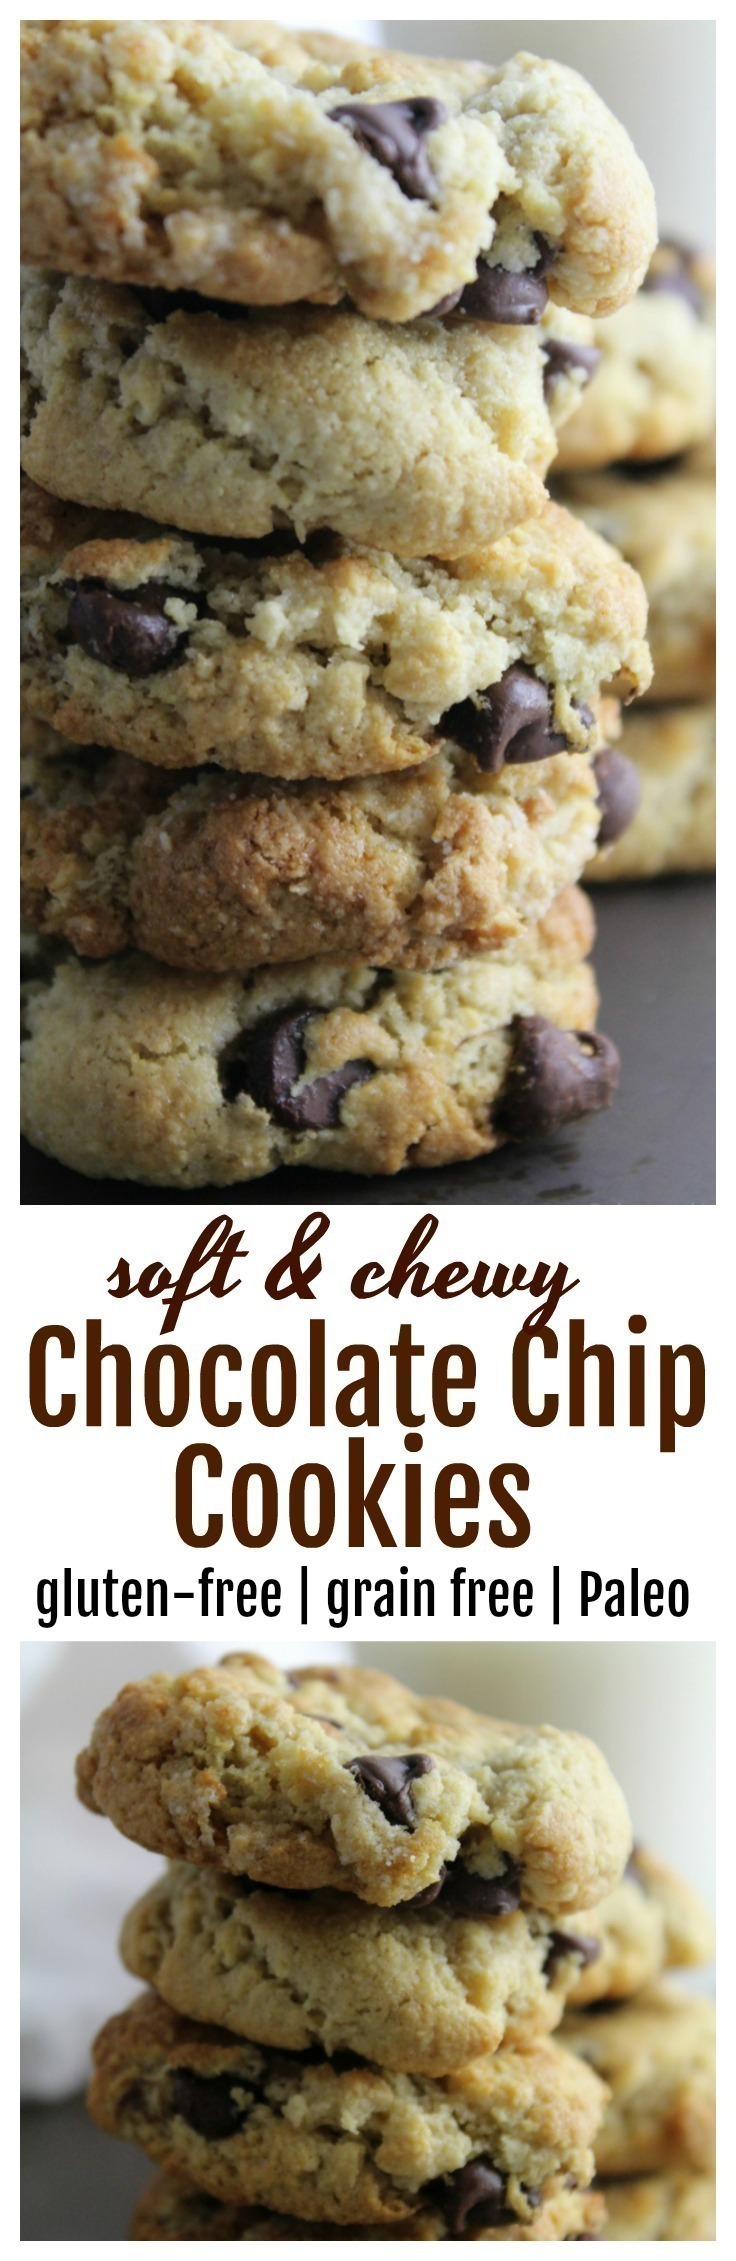 A thick, soft and chewy chocolate chip cookie that's gluten-free, grain-free, and Paleo. 